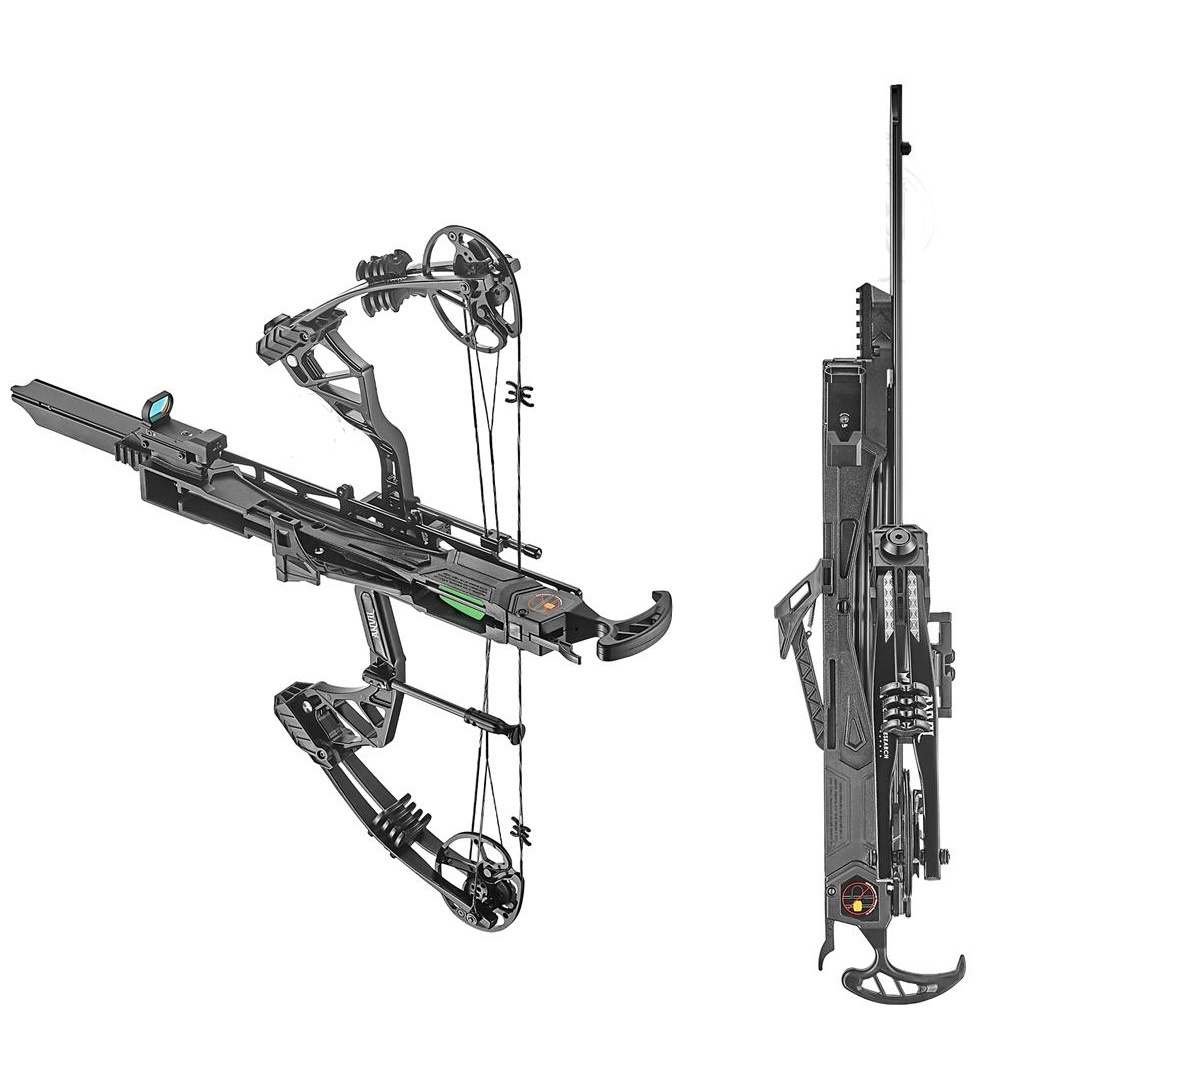 EK-Archery Whipshot 15-50 lbs - Compound bow with rapid fire magazine